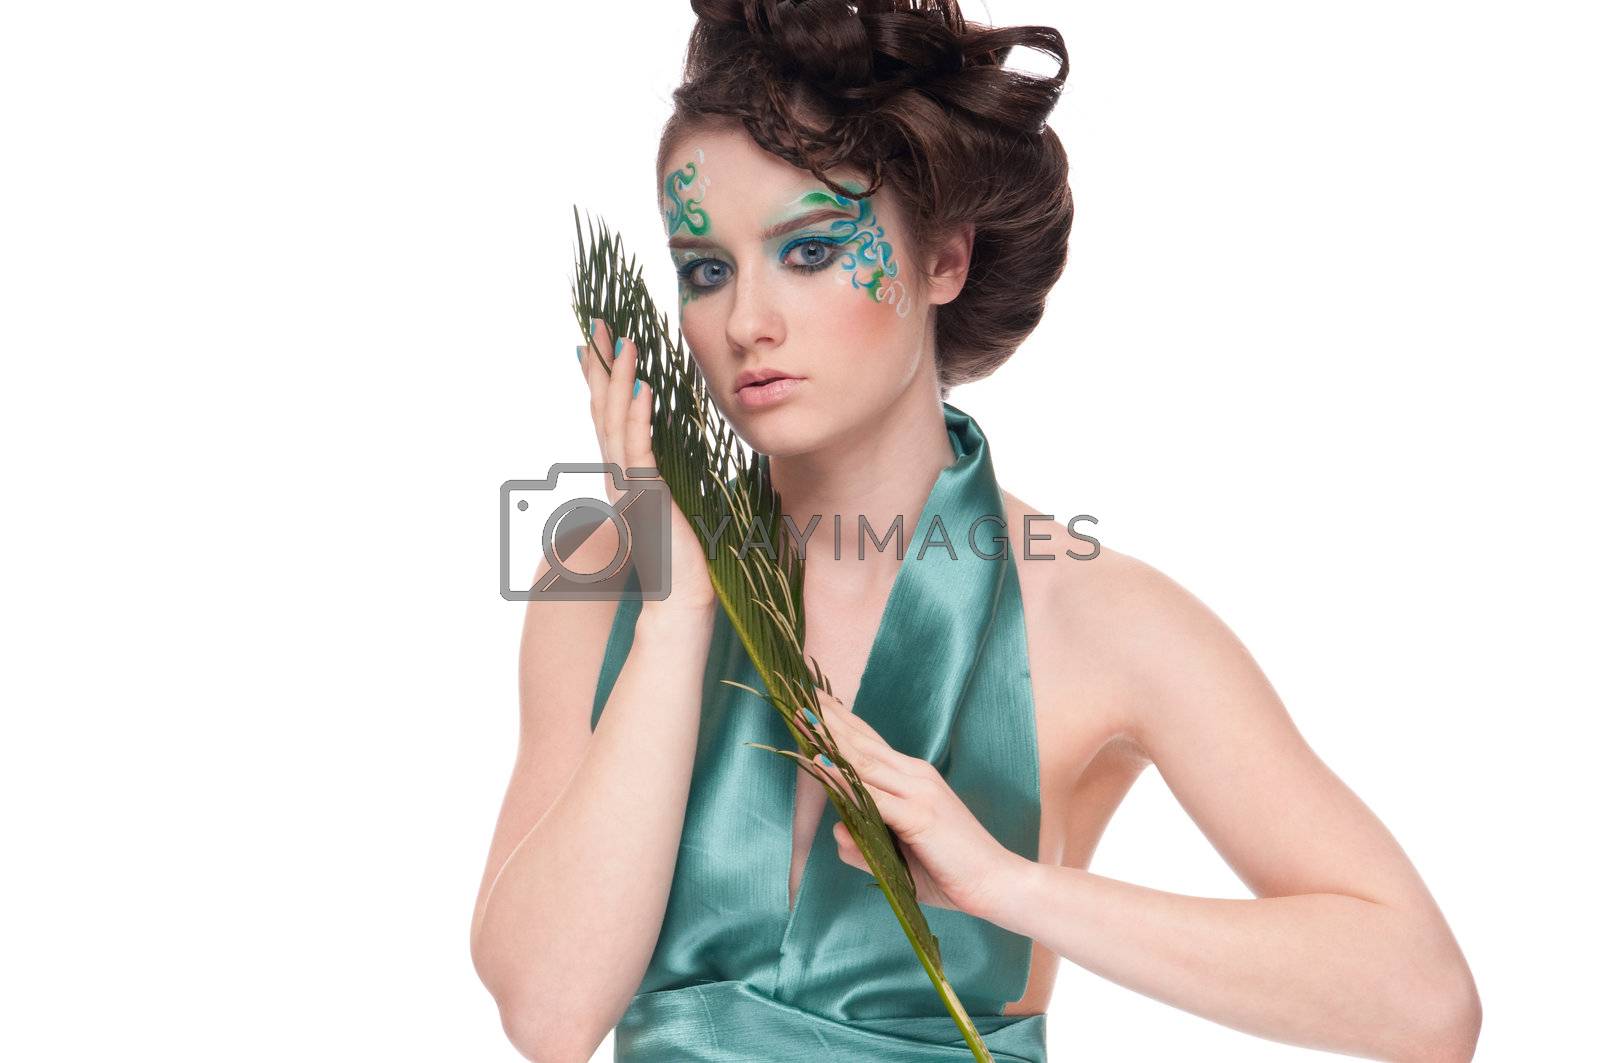 Royalty free image of Close-up of sprite girl with faceart and plant by markin